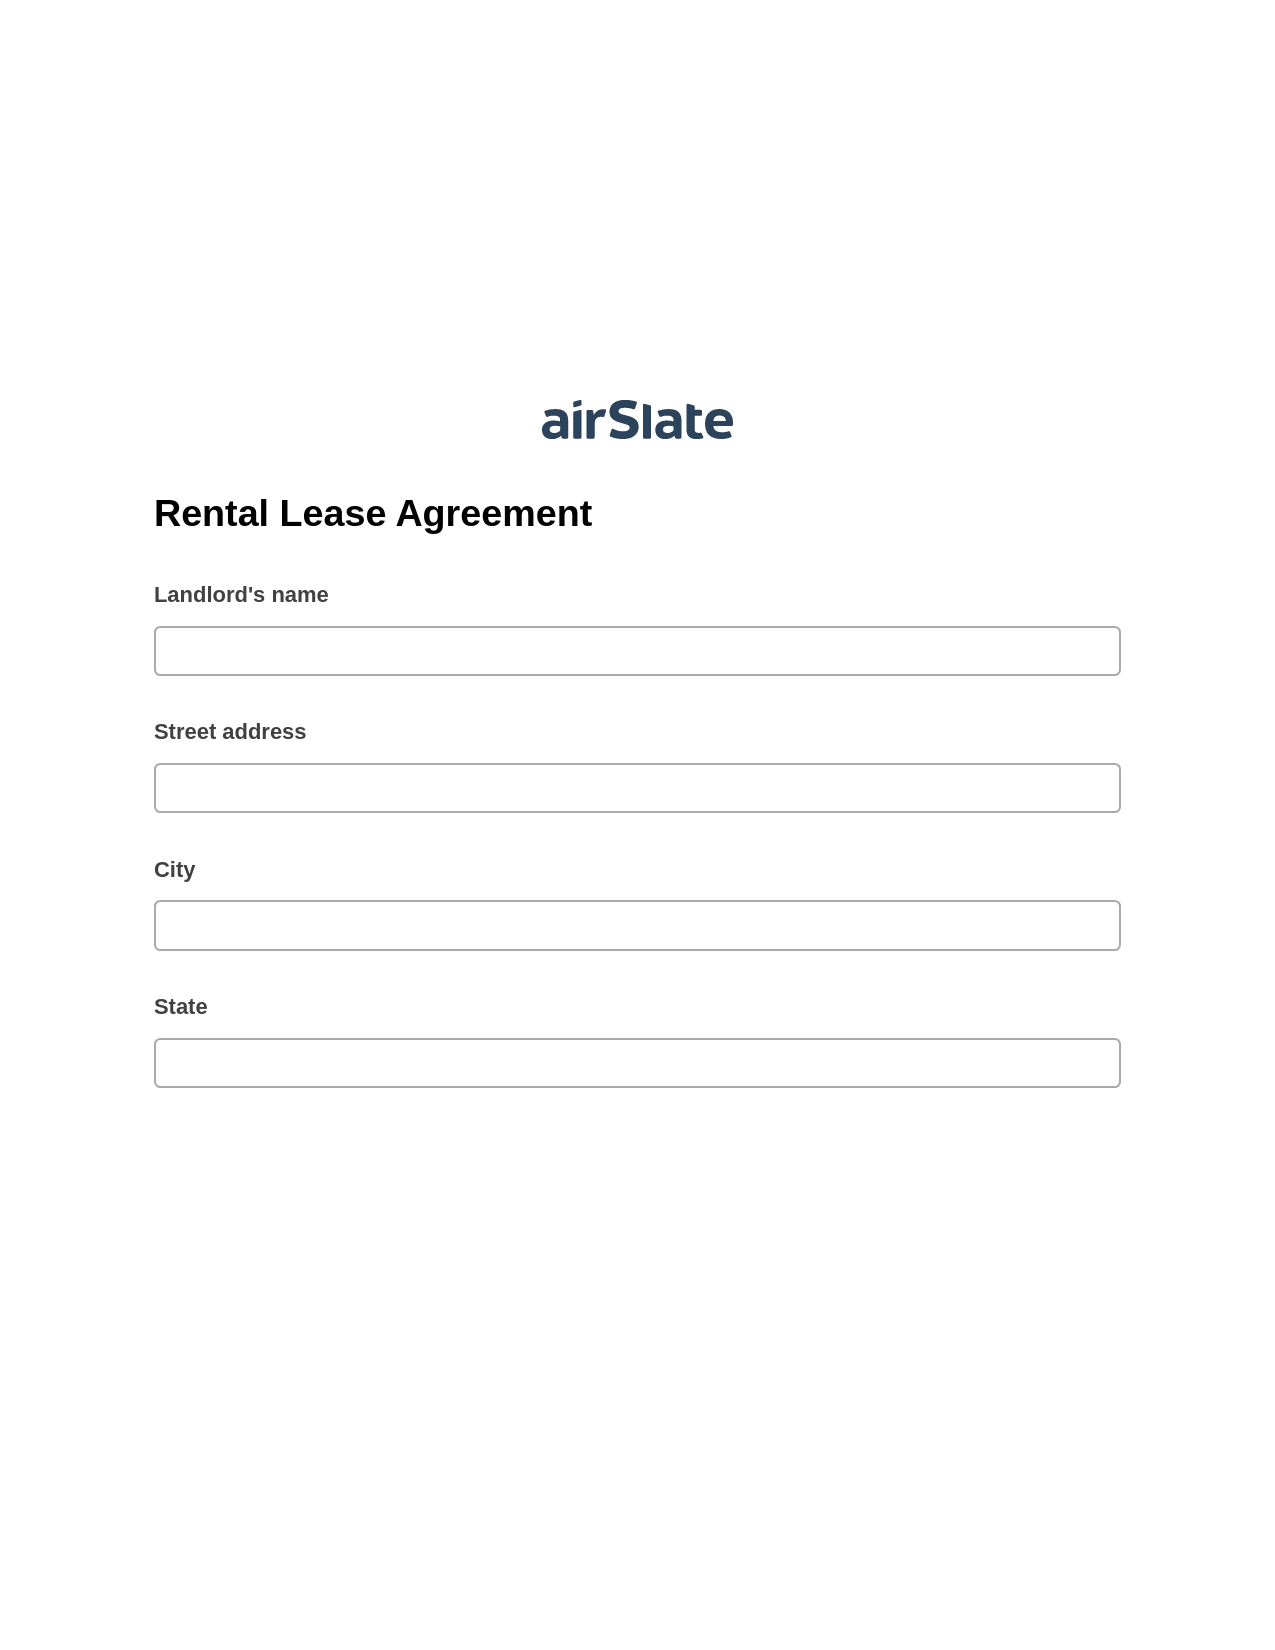 Multirole Rental Lease Agreement Pre-fill from CSV File Dropdown Options Bot, Lock the slate bot, Post-finish Document Bot